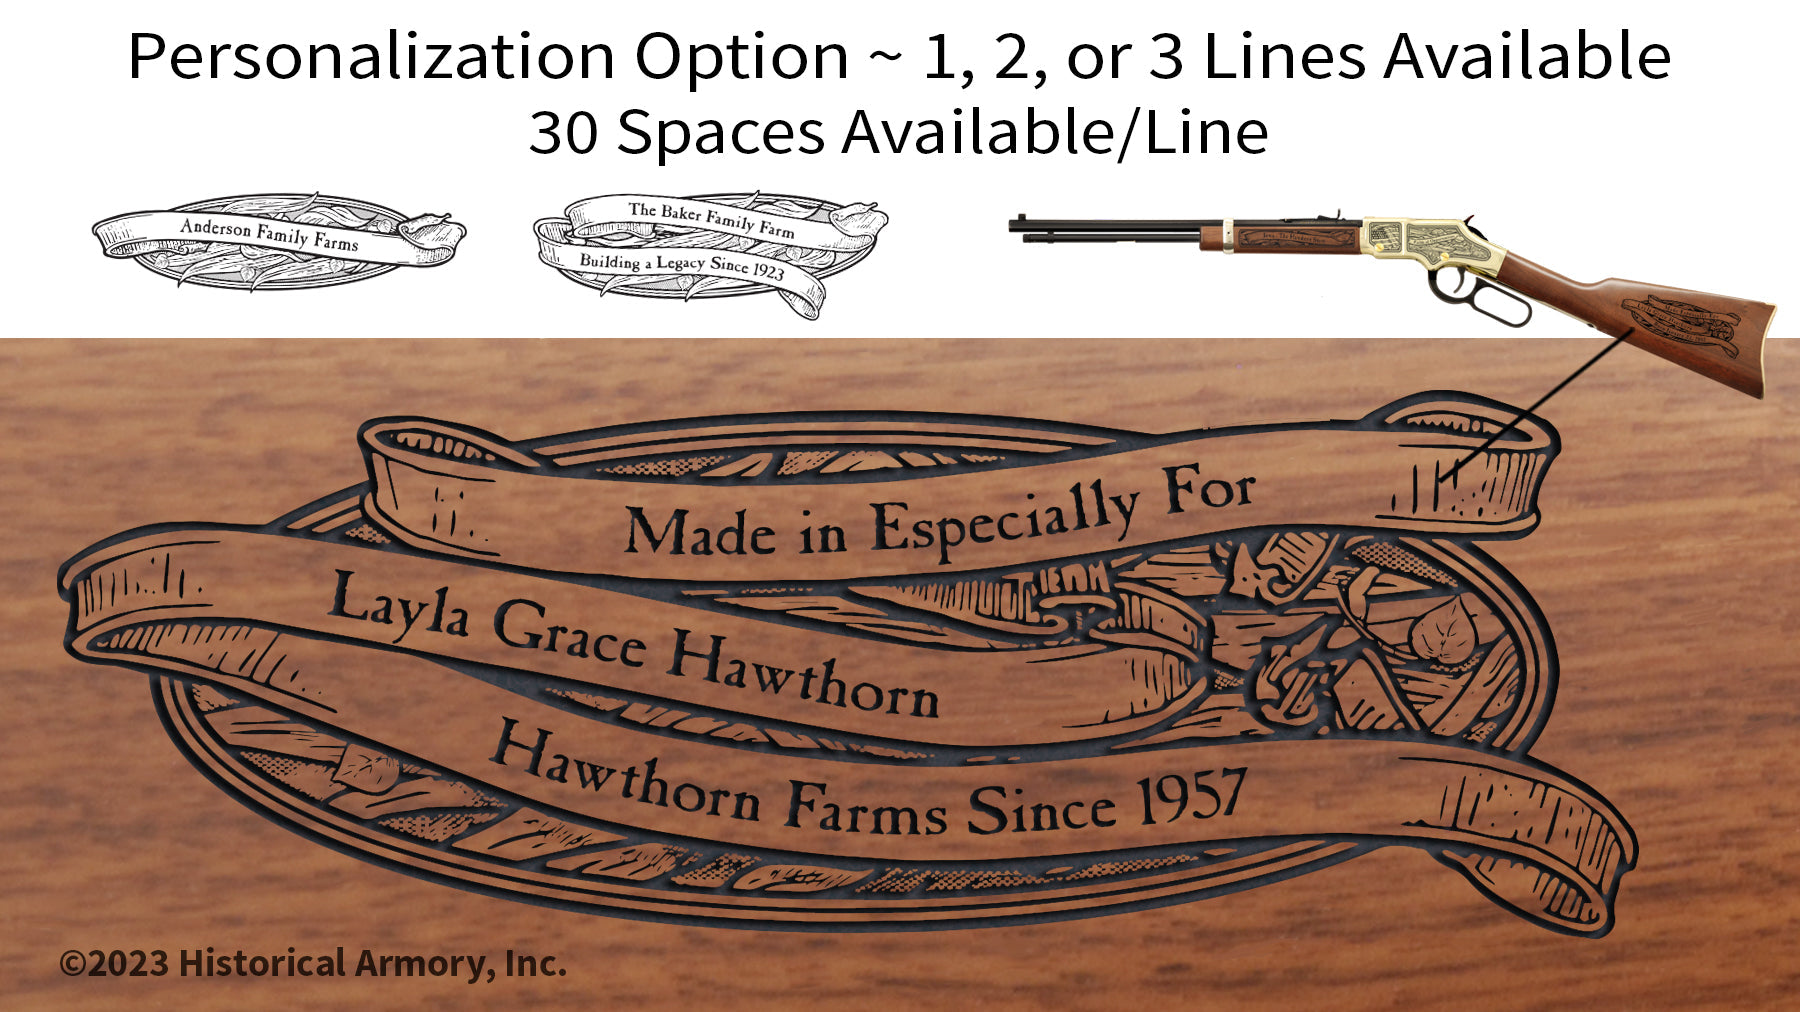 Idaho Agricultural Heritage Engraved Rifle Personalization